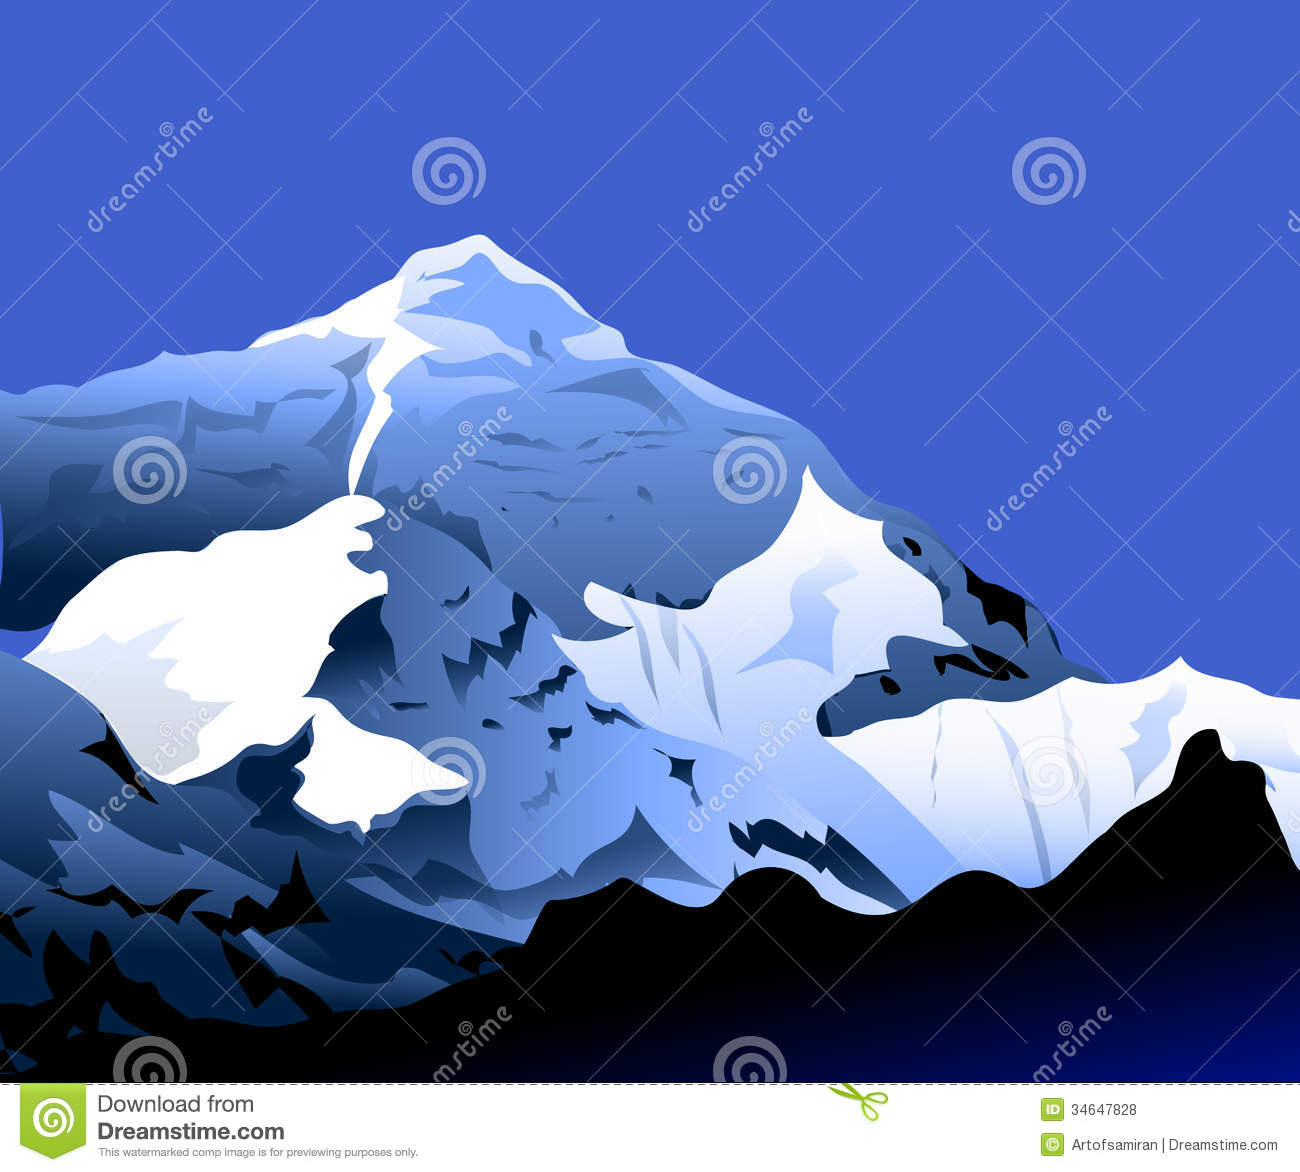 Mount Everest clipart #6, Download drawings